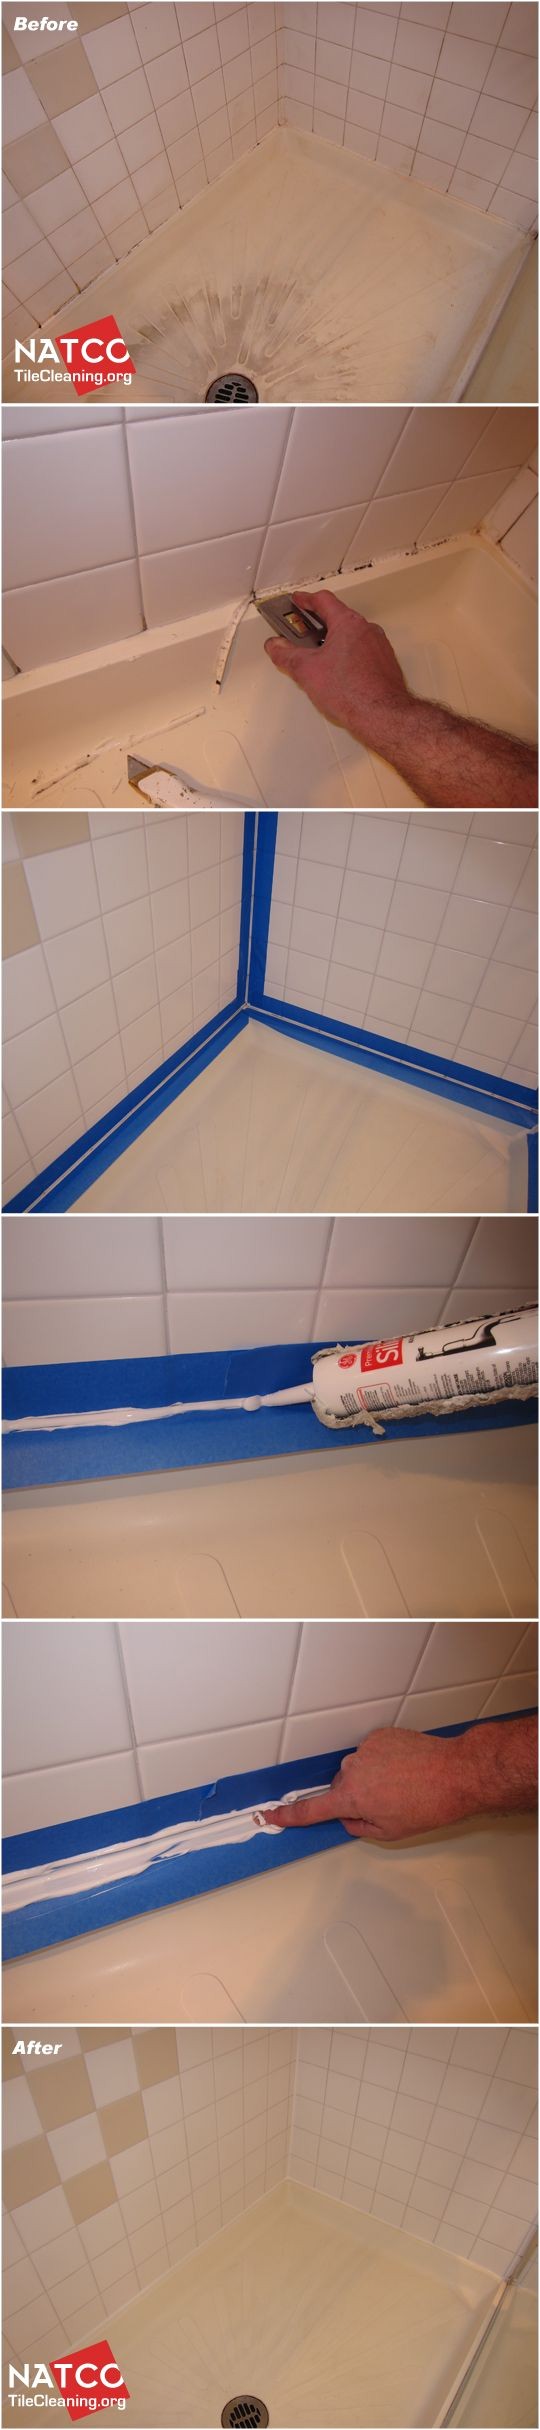 how to replace black moldy caulk and clean a tile shower ugh gonna have to do this with one of our showers since every other pinterest tip on cleaning